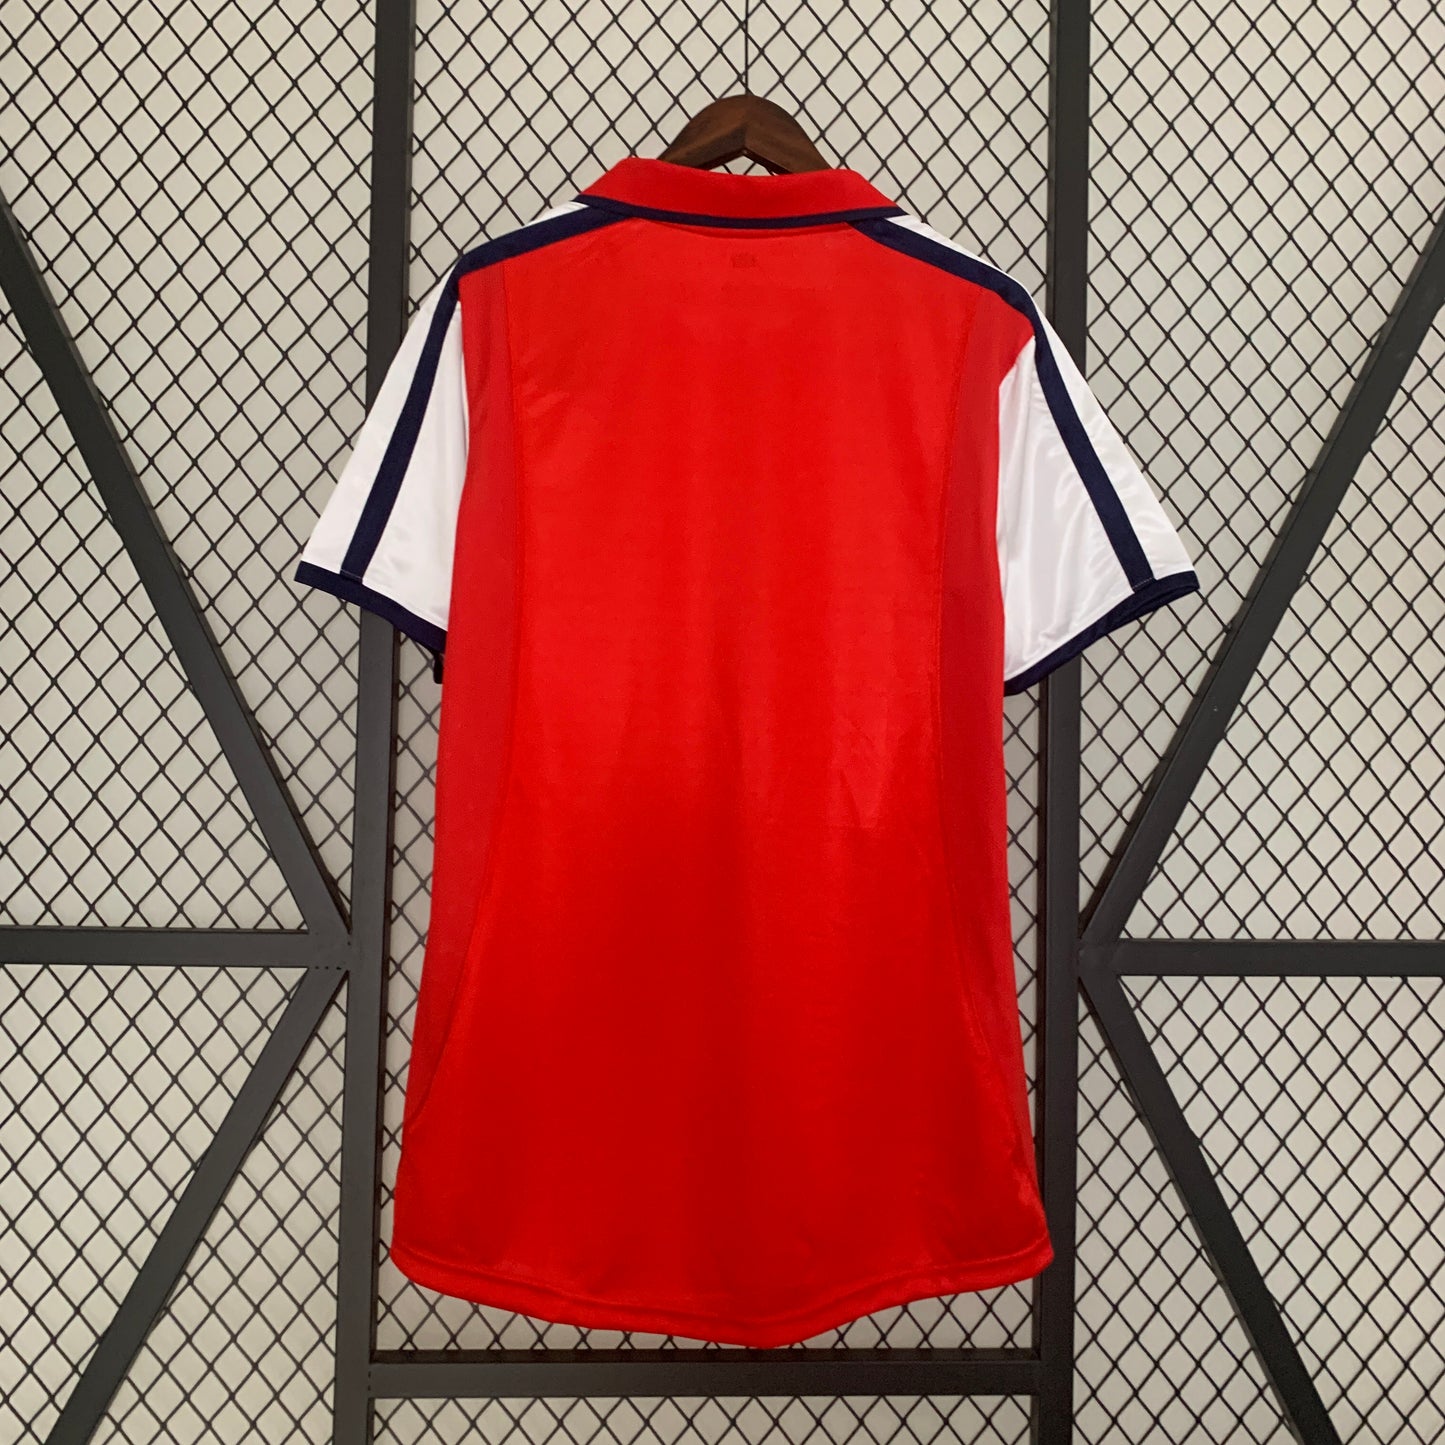 ARSENAL 2001 - 2002 HOME JERSEY